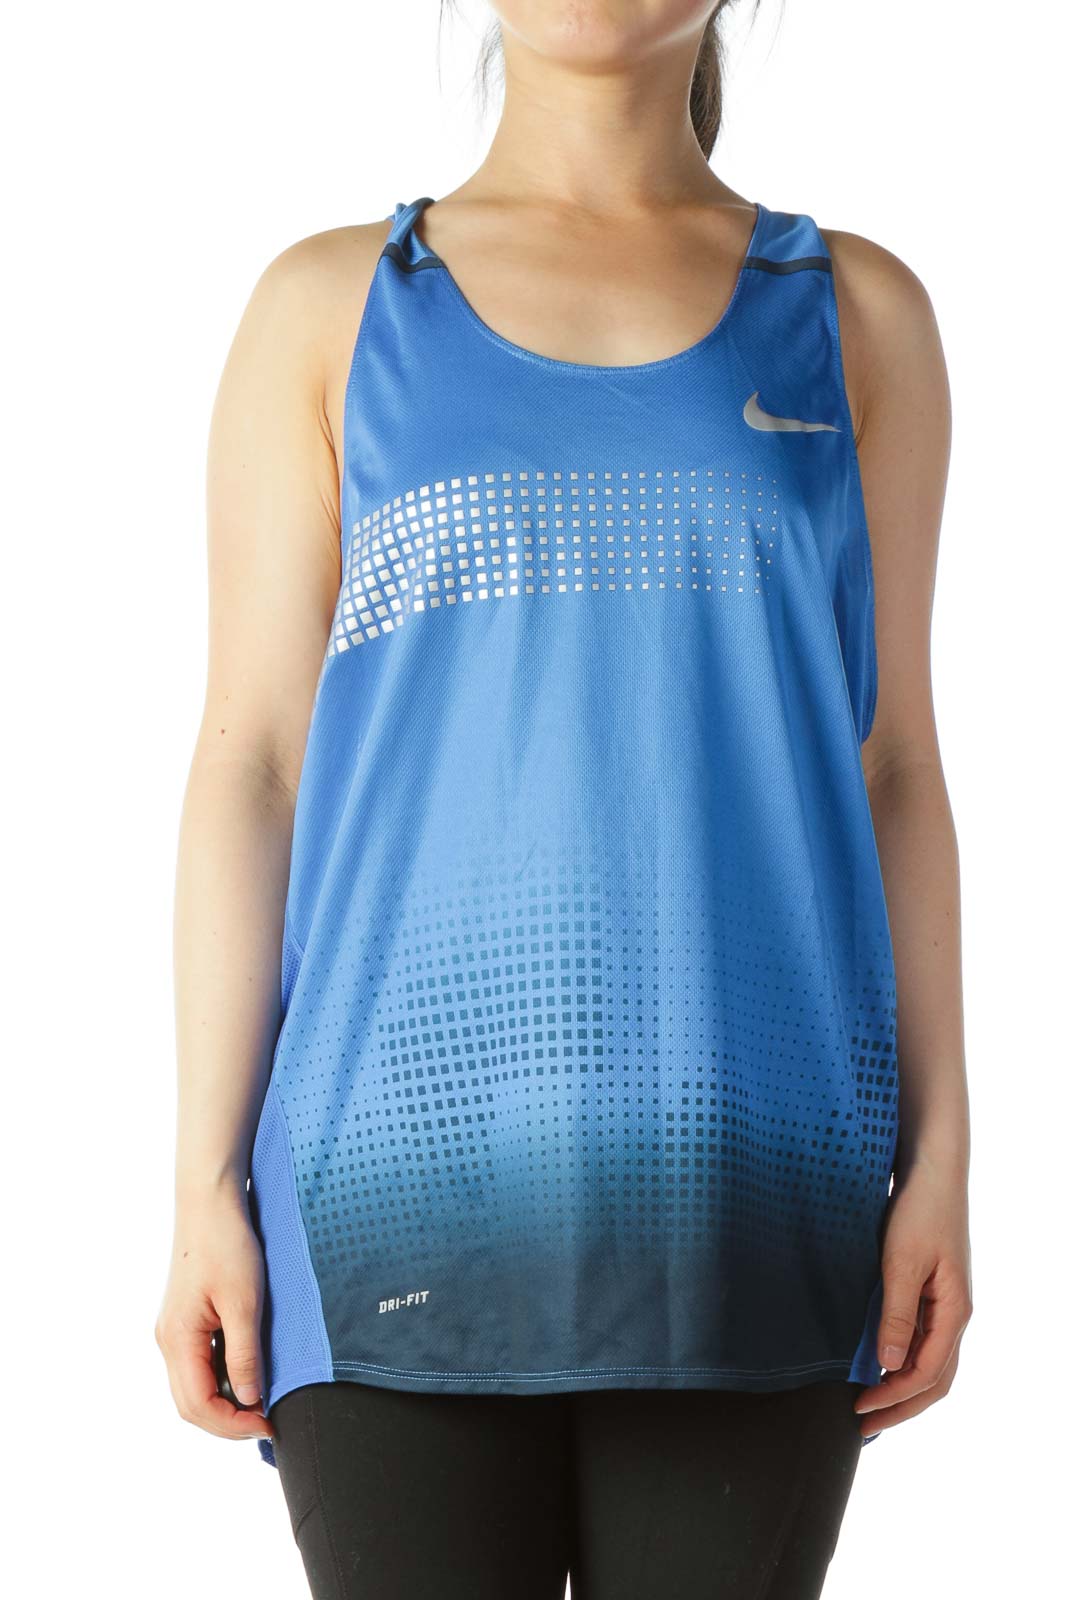 Blue Athletic Tank Top Front